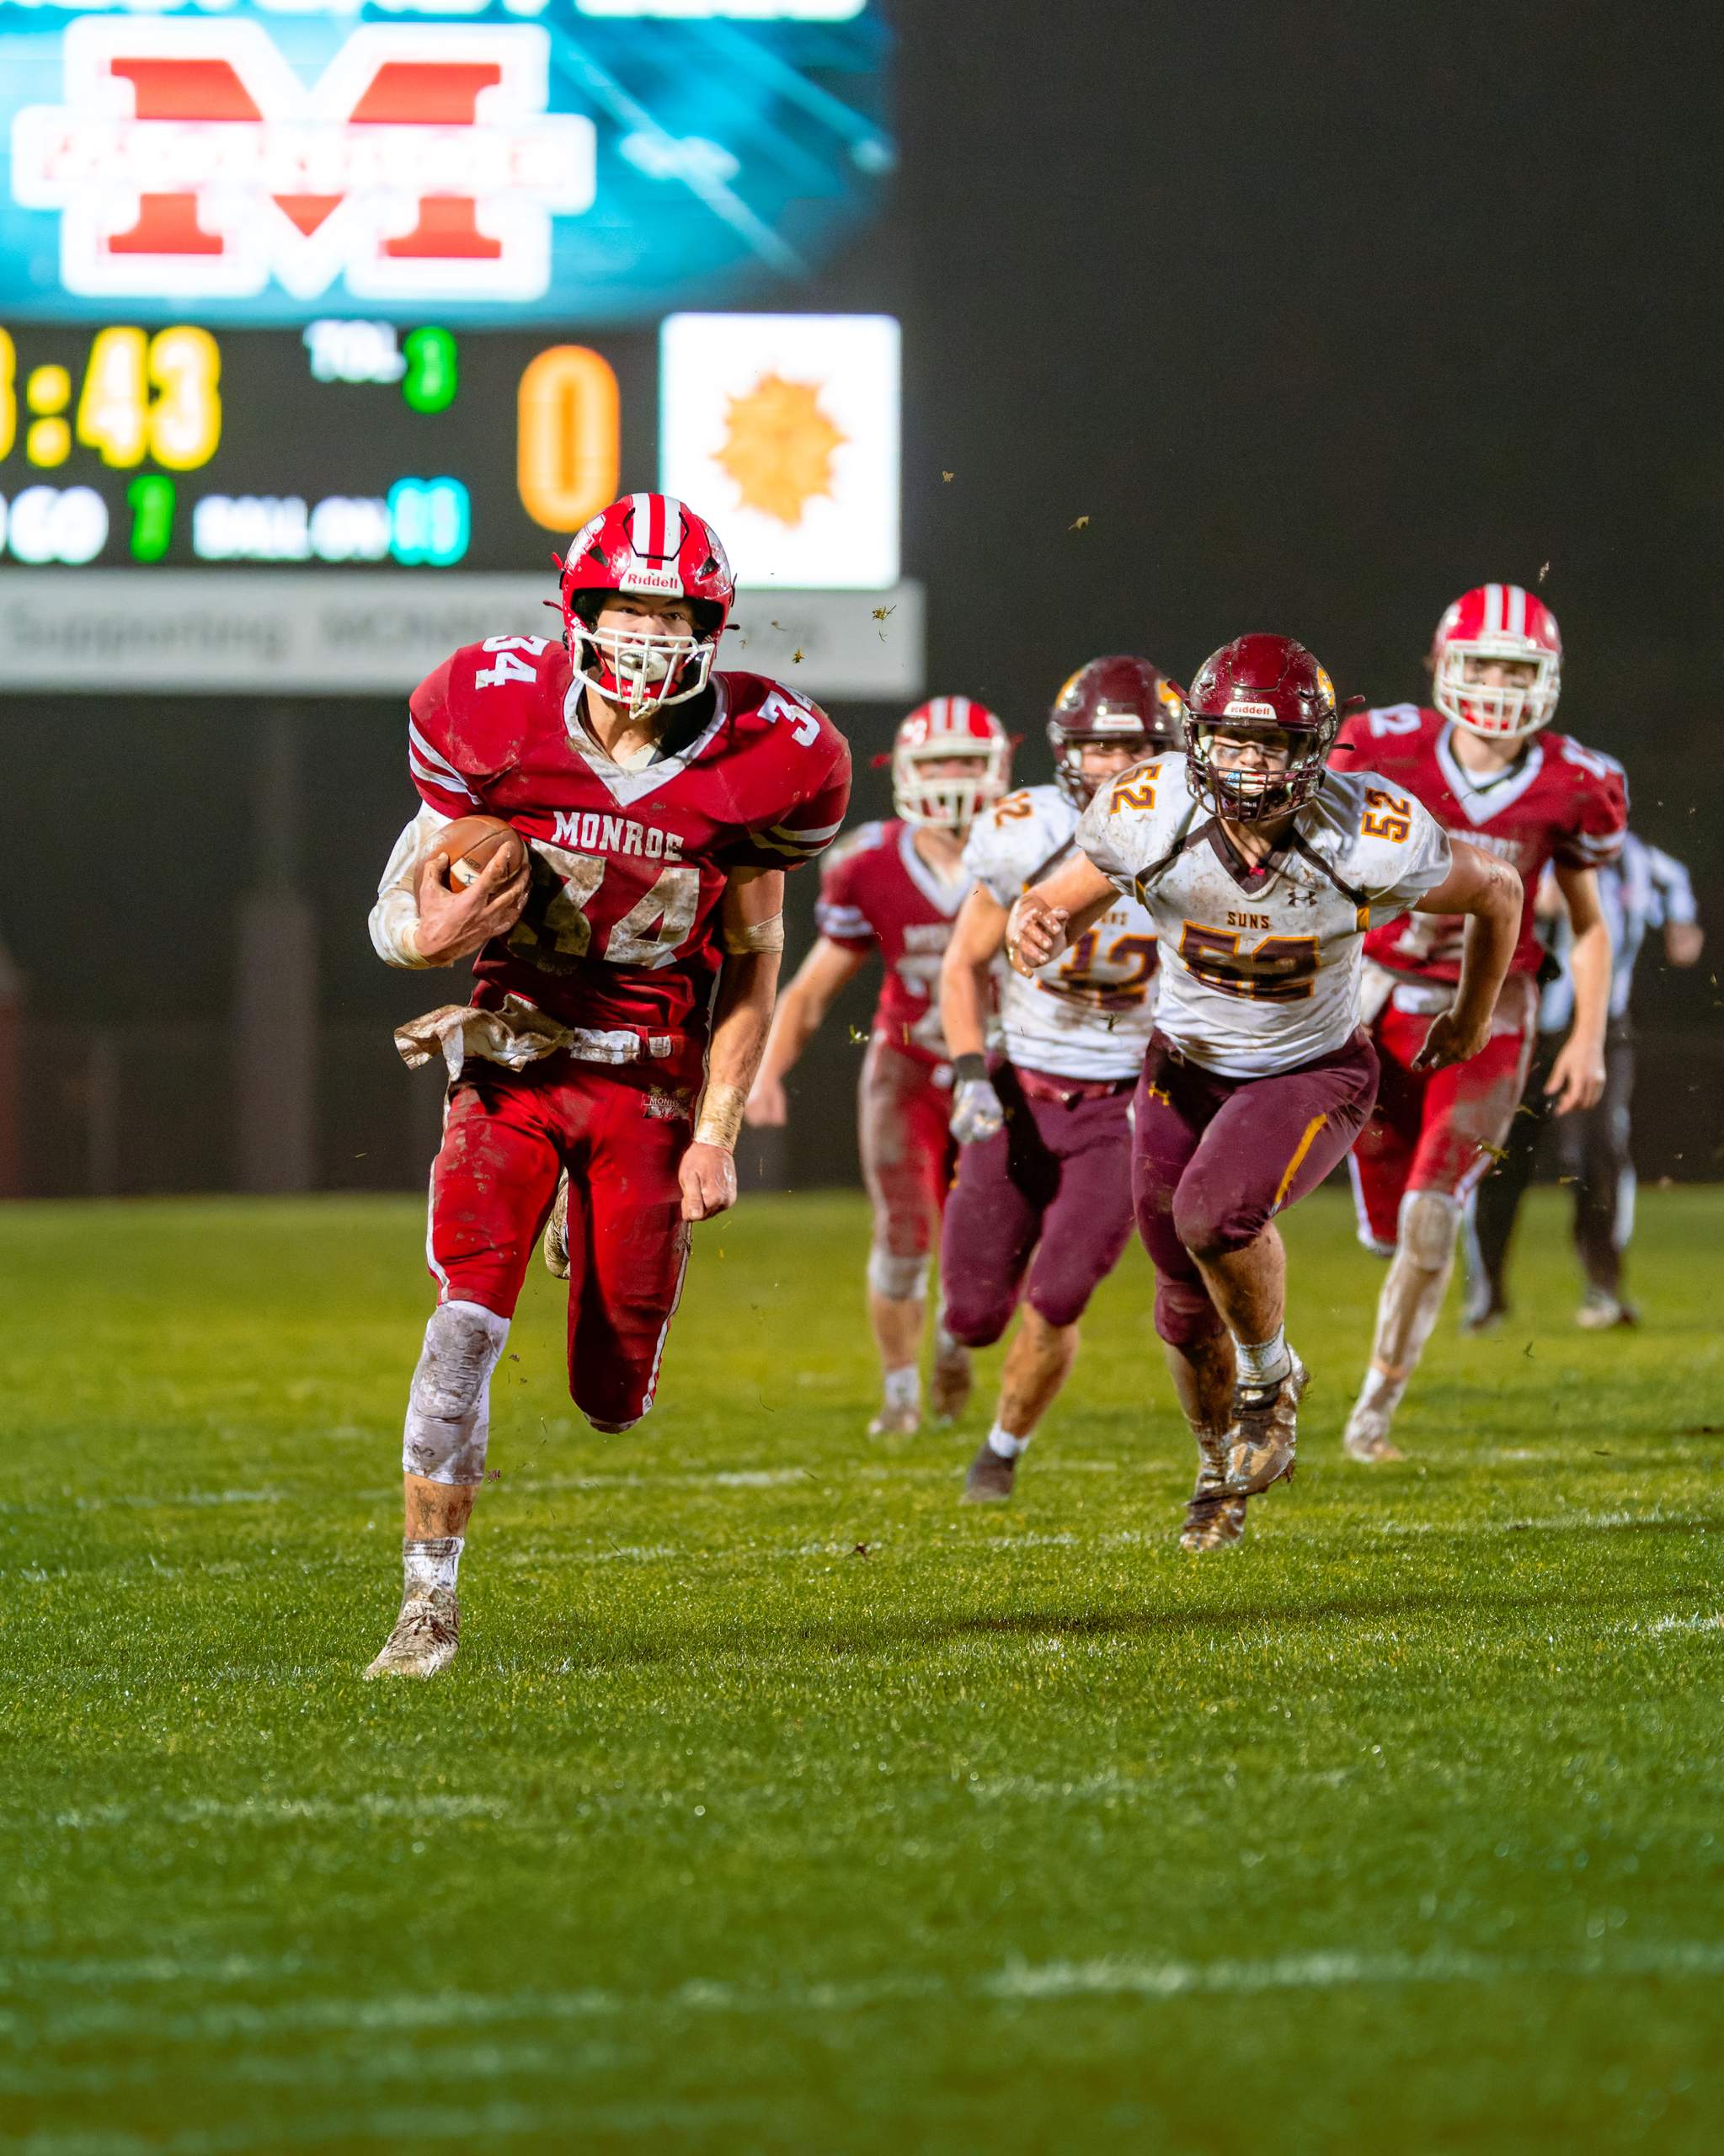 Monroe vs. West Bend East, Round 3 of the 2022 WIAA Playoffs, photography by Ross Harried for Second Crop Sports